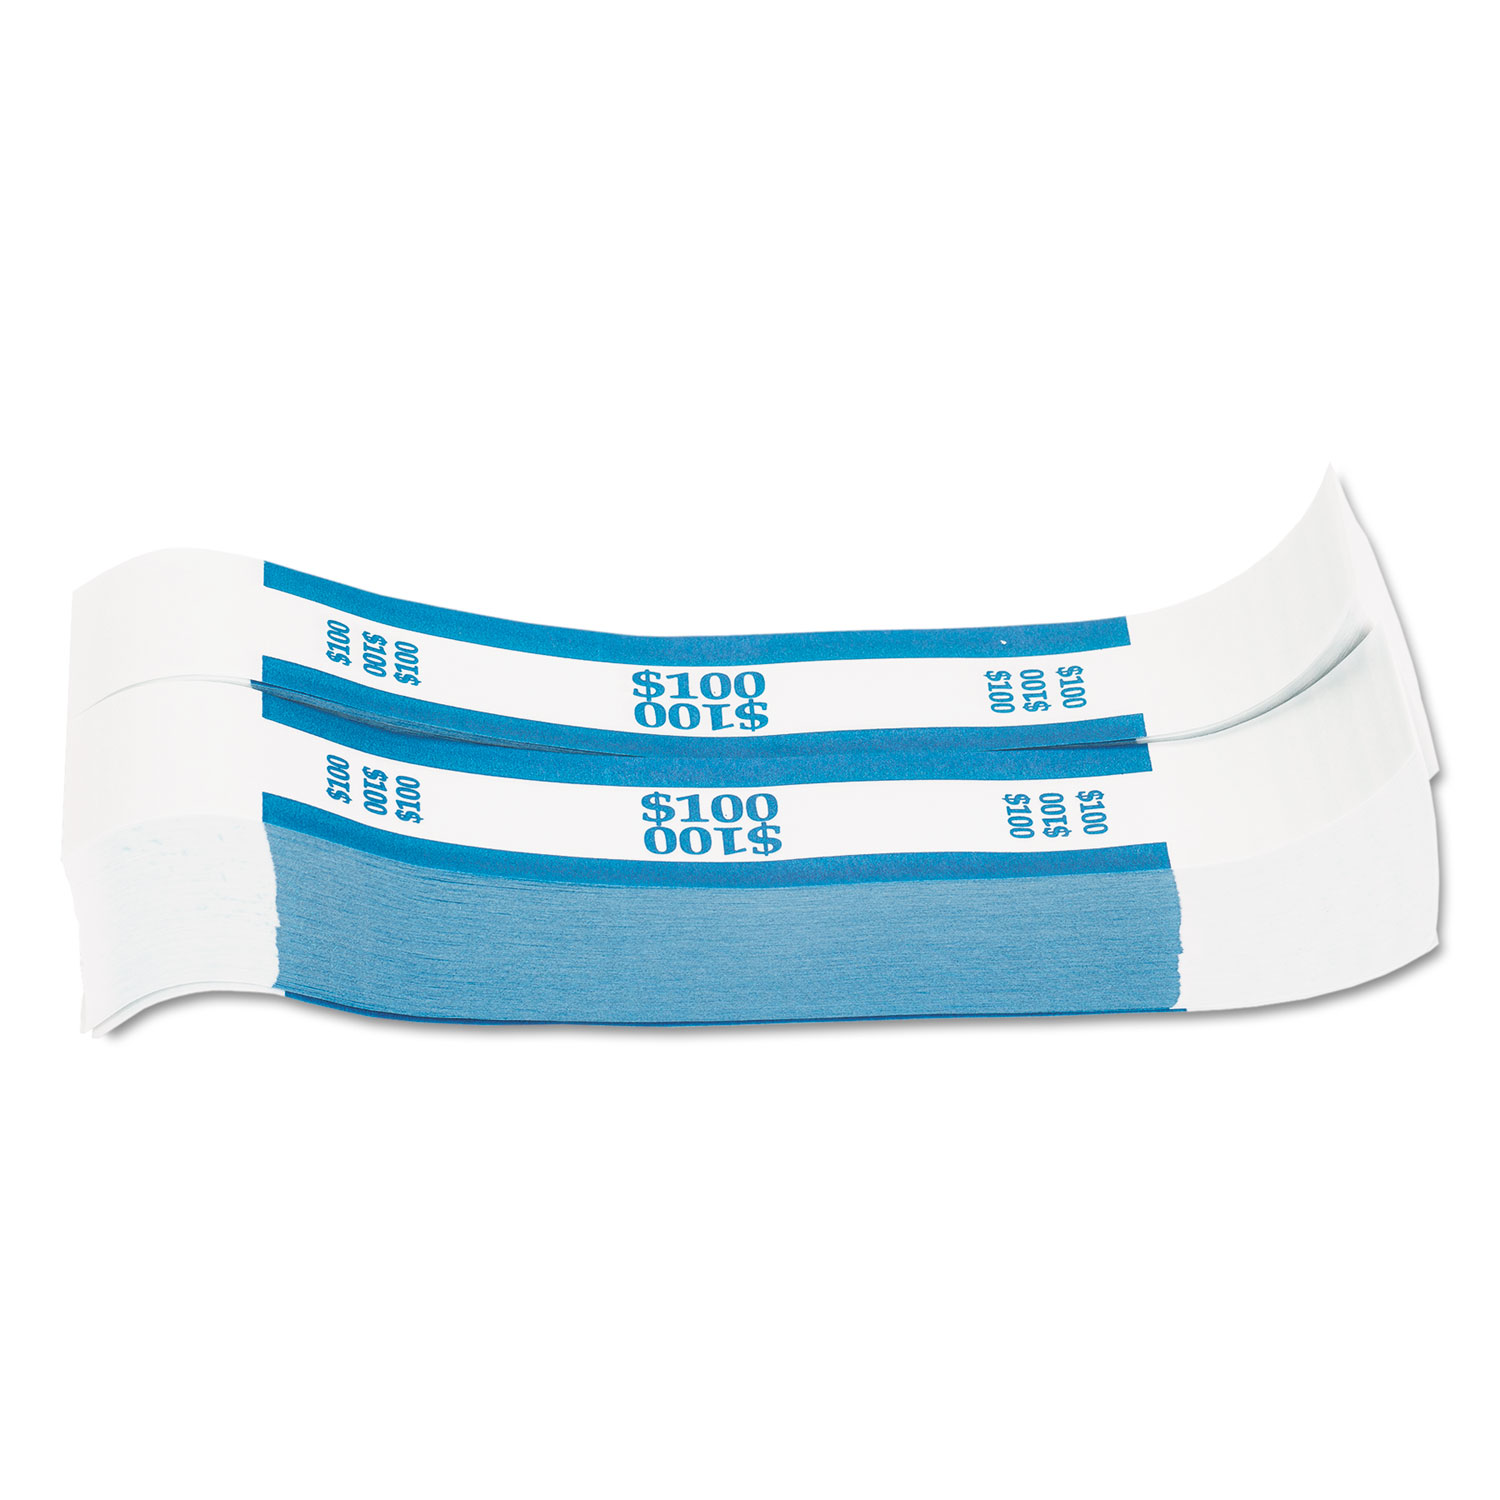  Pap-R Products 216070C08 Currency Straps, Blue, $100 in Dollar Bills, 1000 Bands/Pack (CTX400100) 